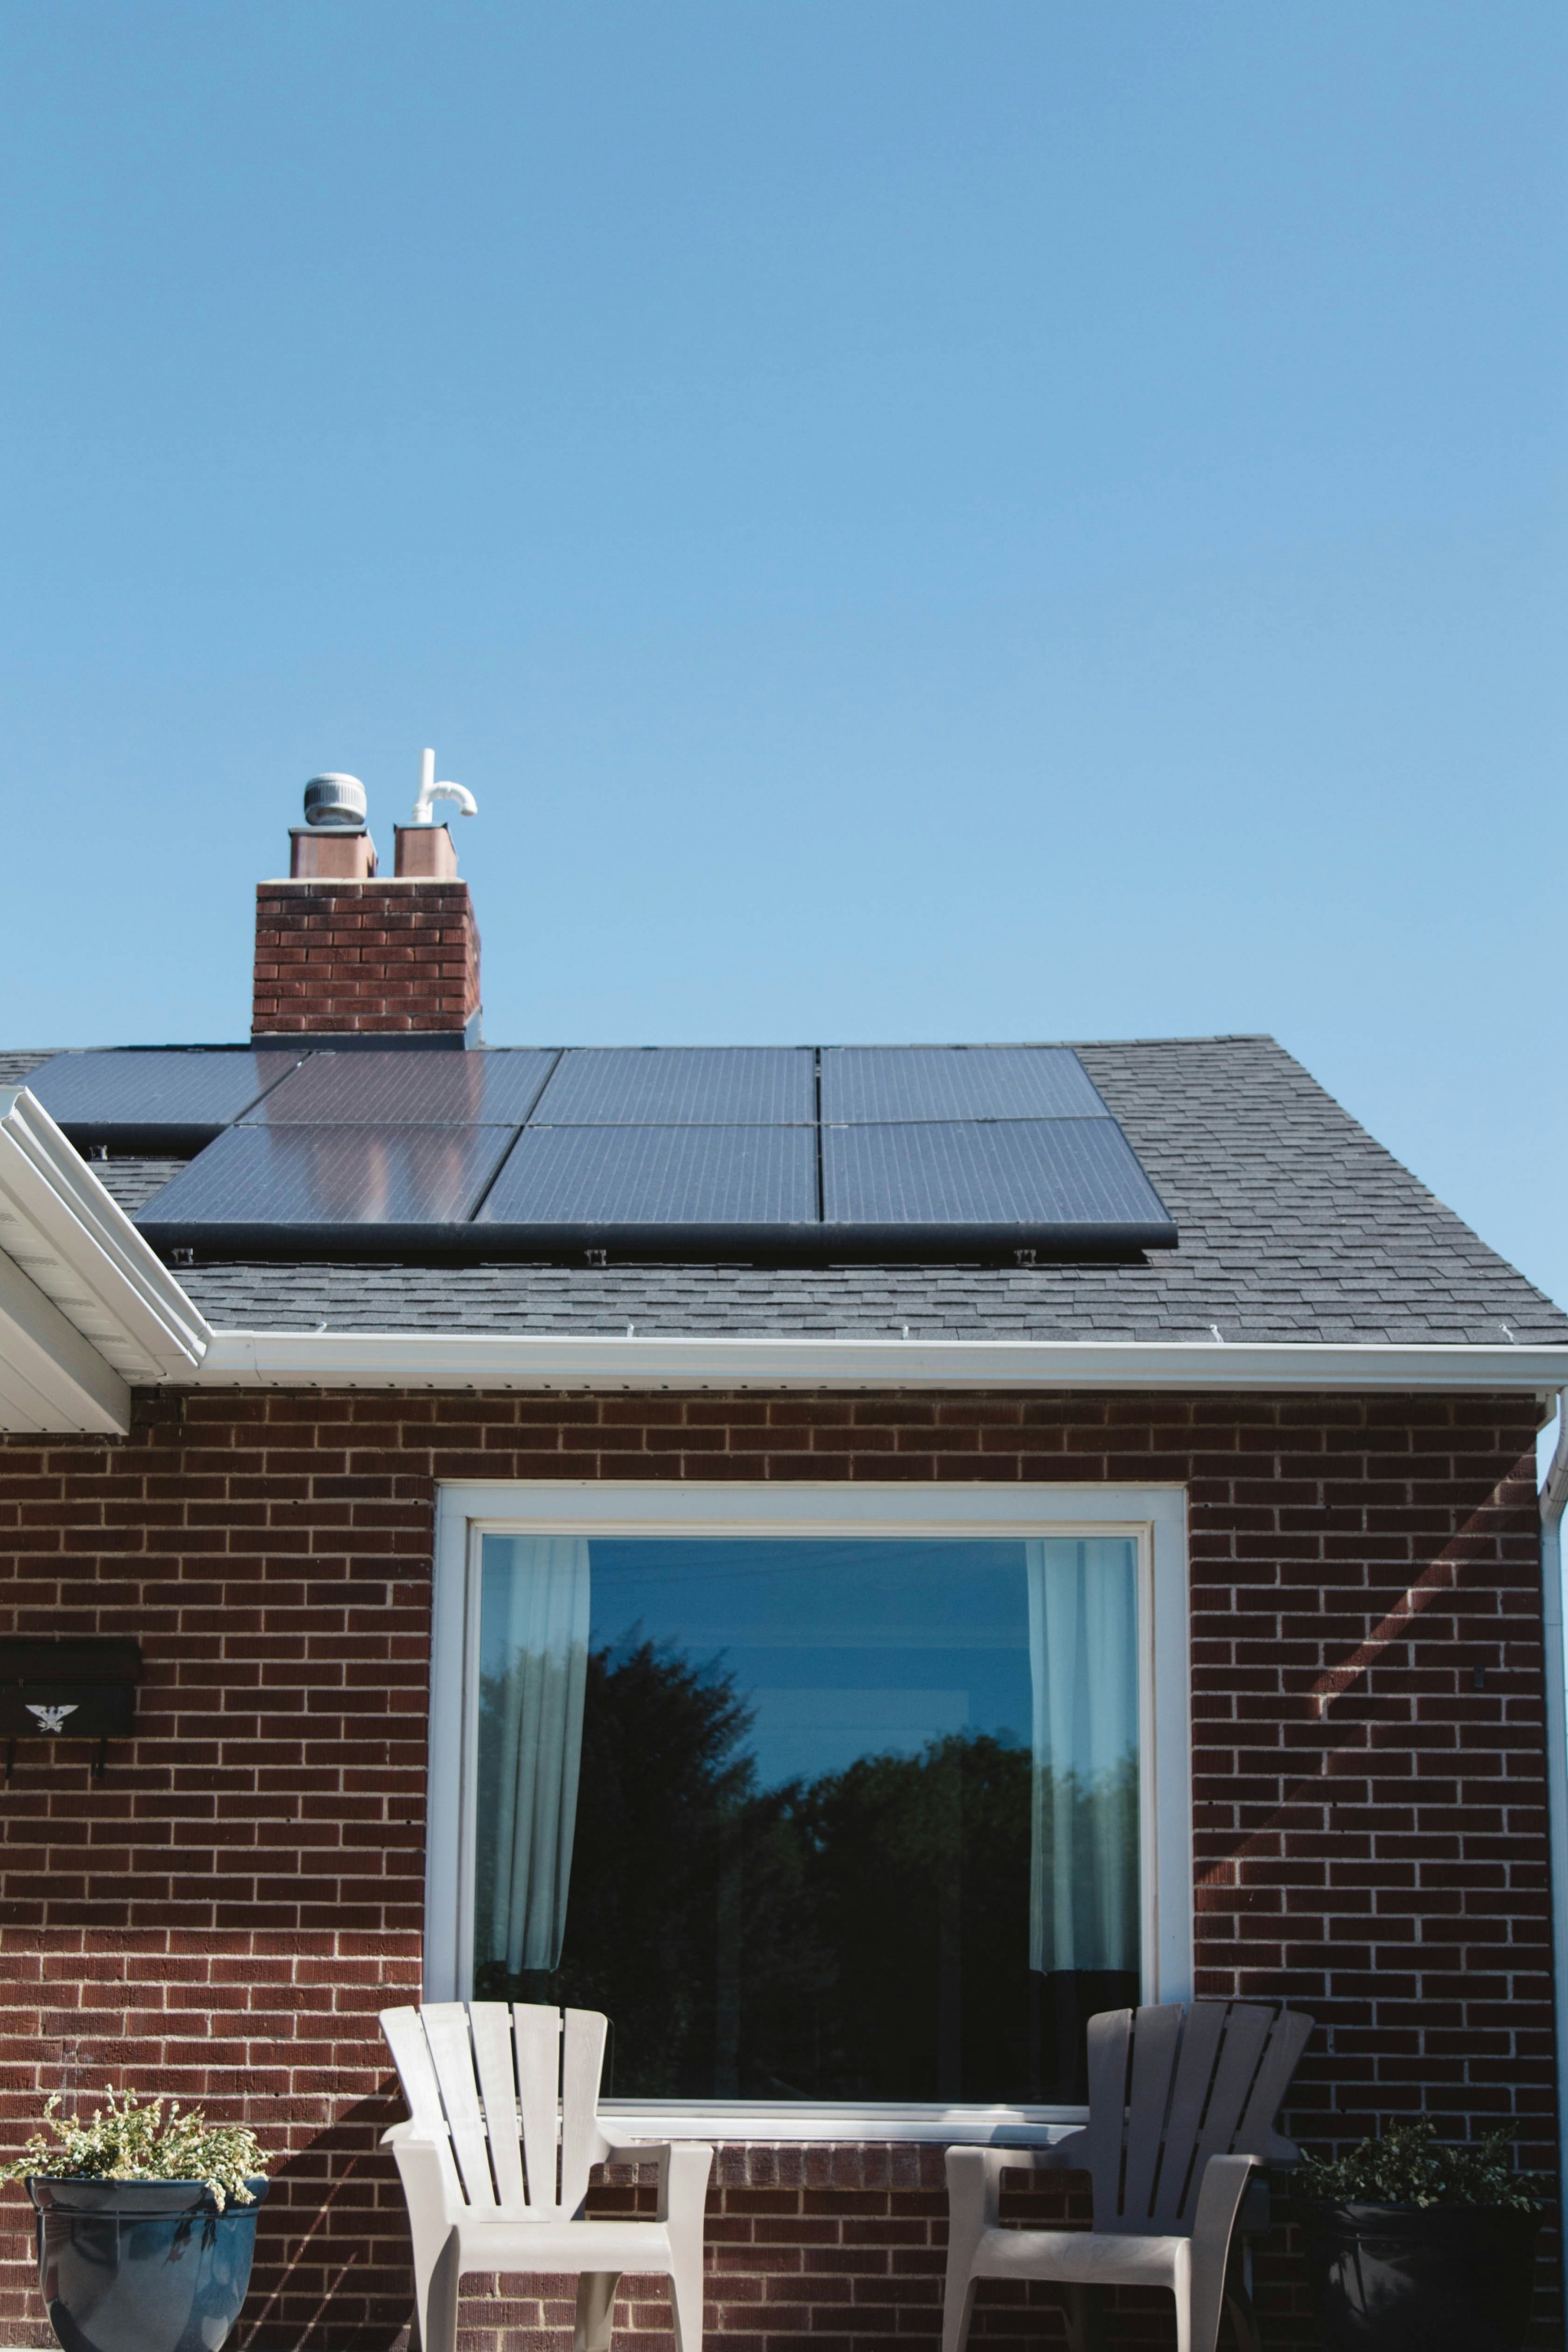 MoIT advises caution over residential solar systems